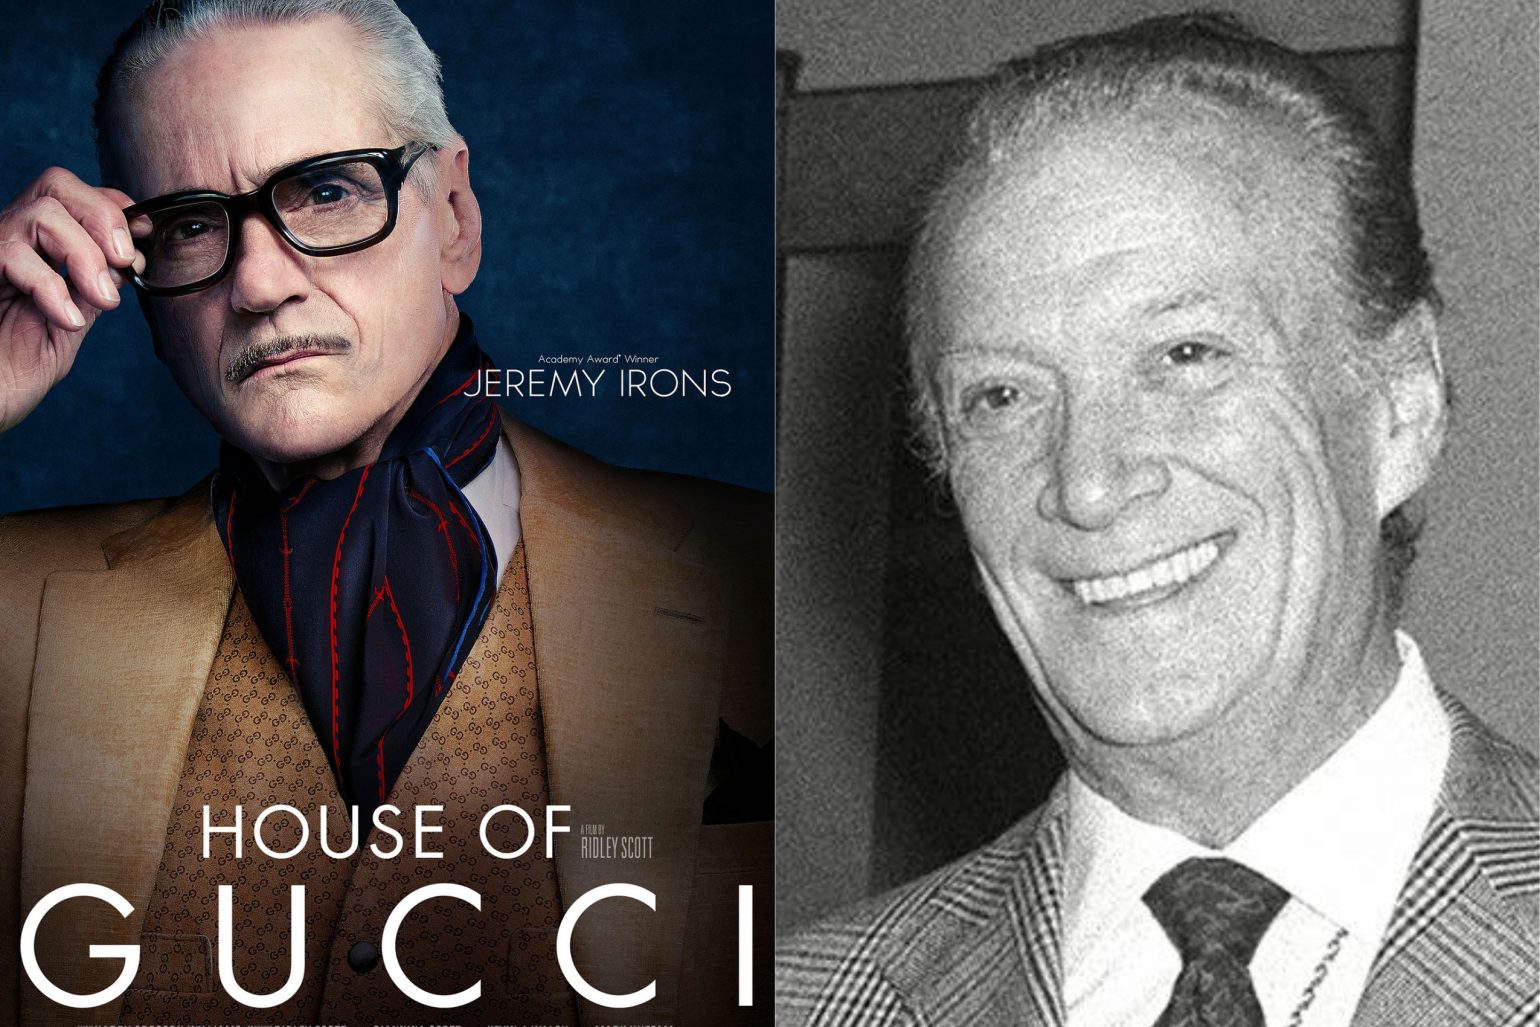 A tale of love, control, and murder: Meet the real House of Gucci